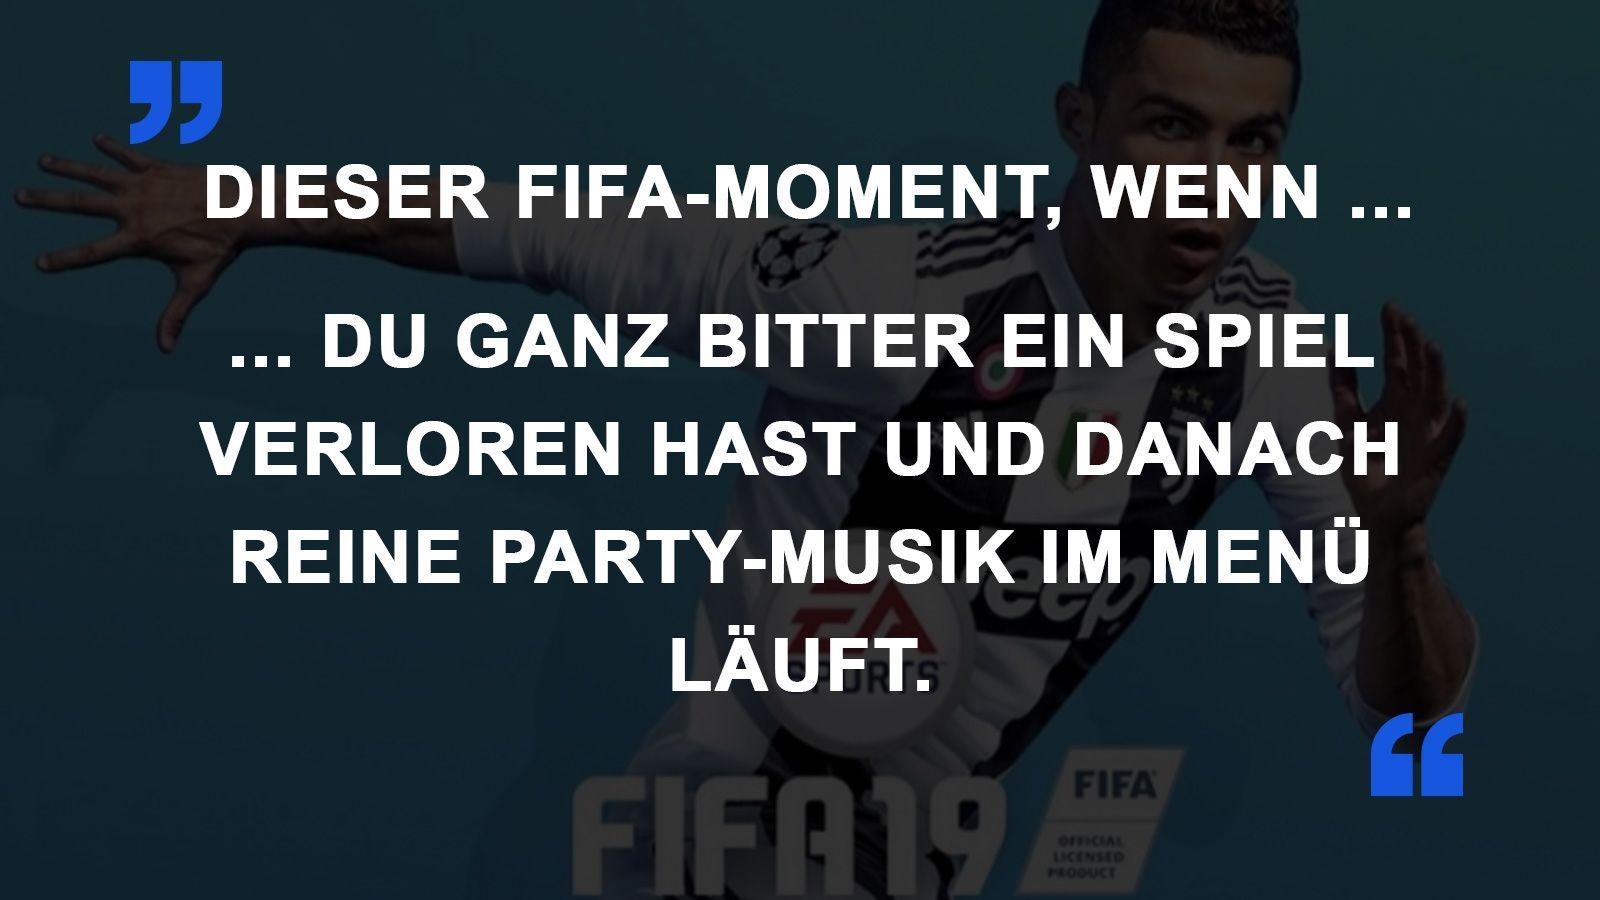 
                <strong>FIFA Momente Party-Musik</strong><br>
                
              